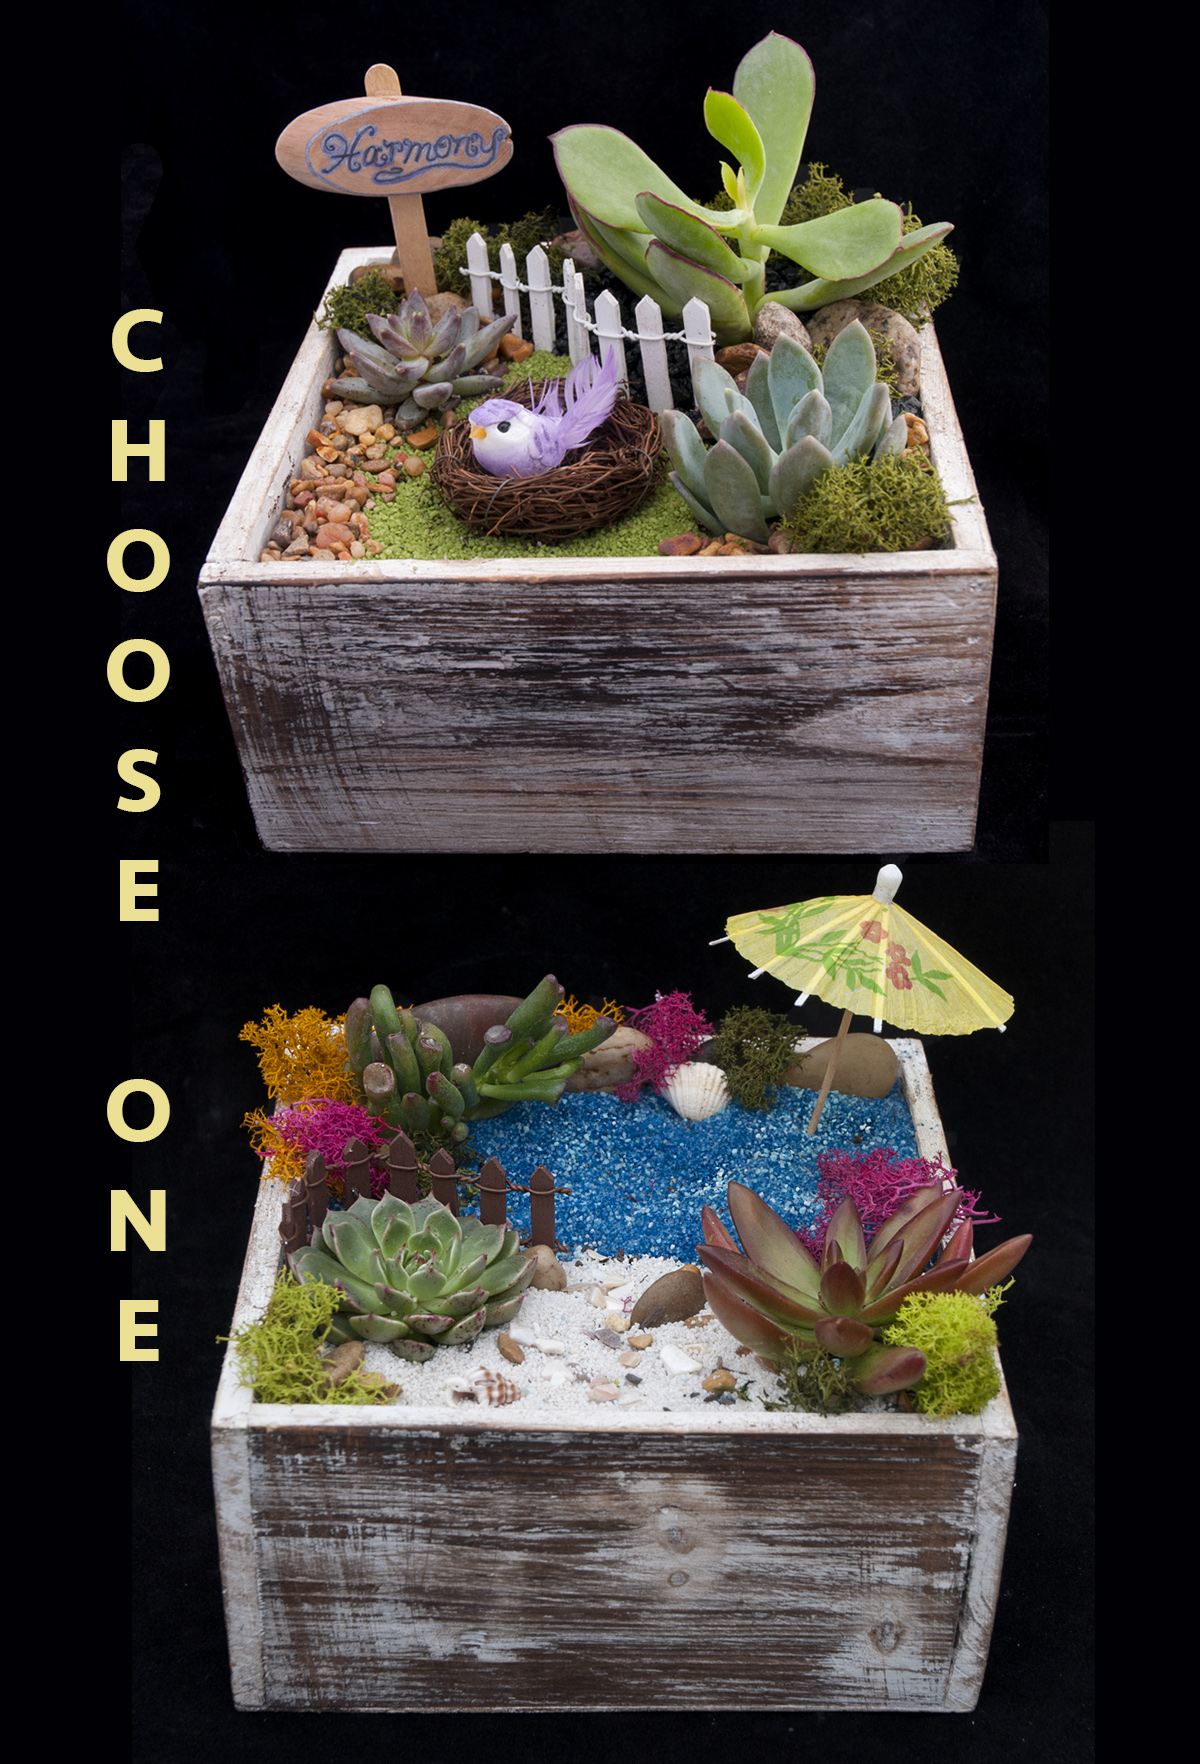 A Harmony or Beach Choice plant nite project by Yaymaker